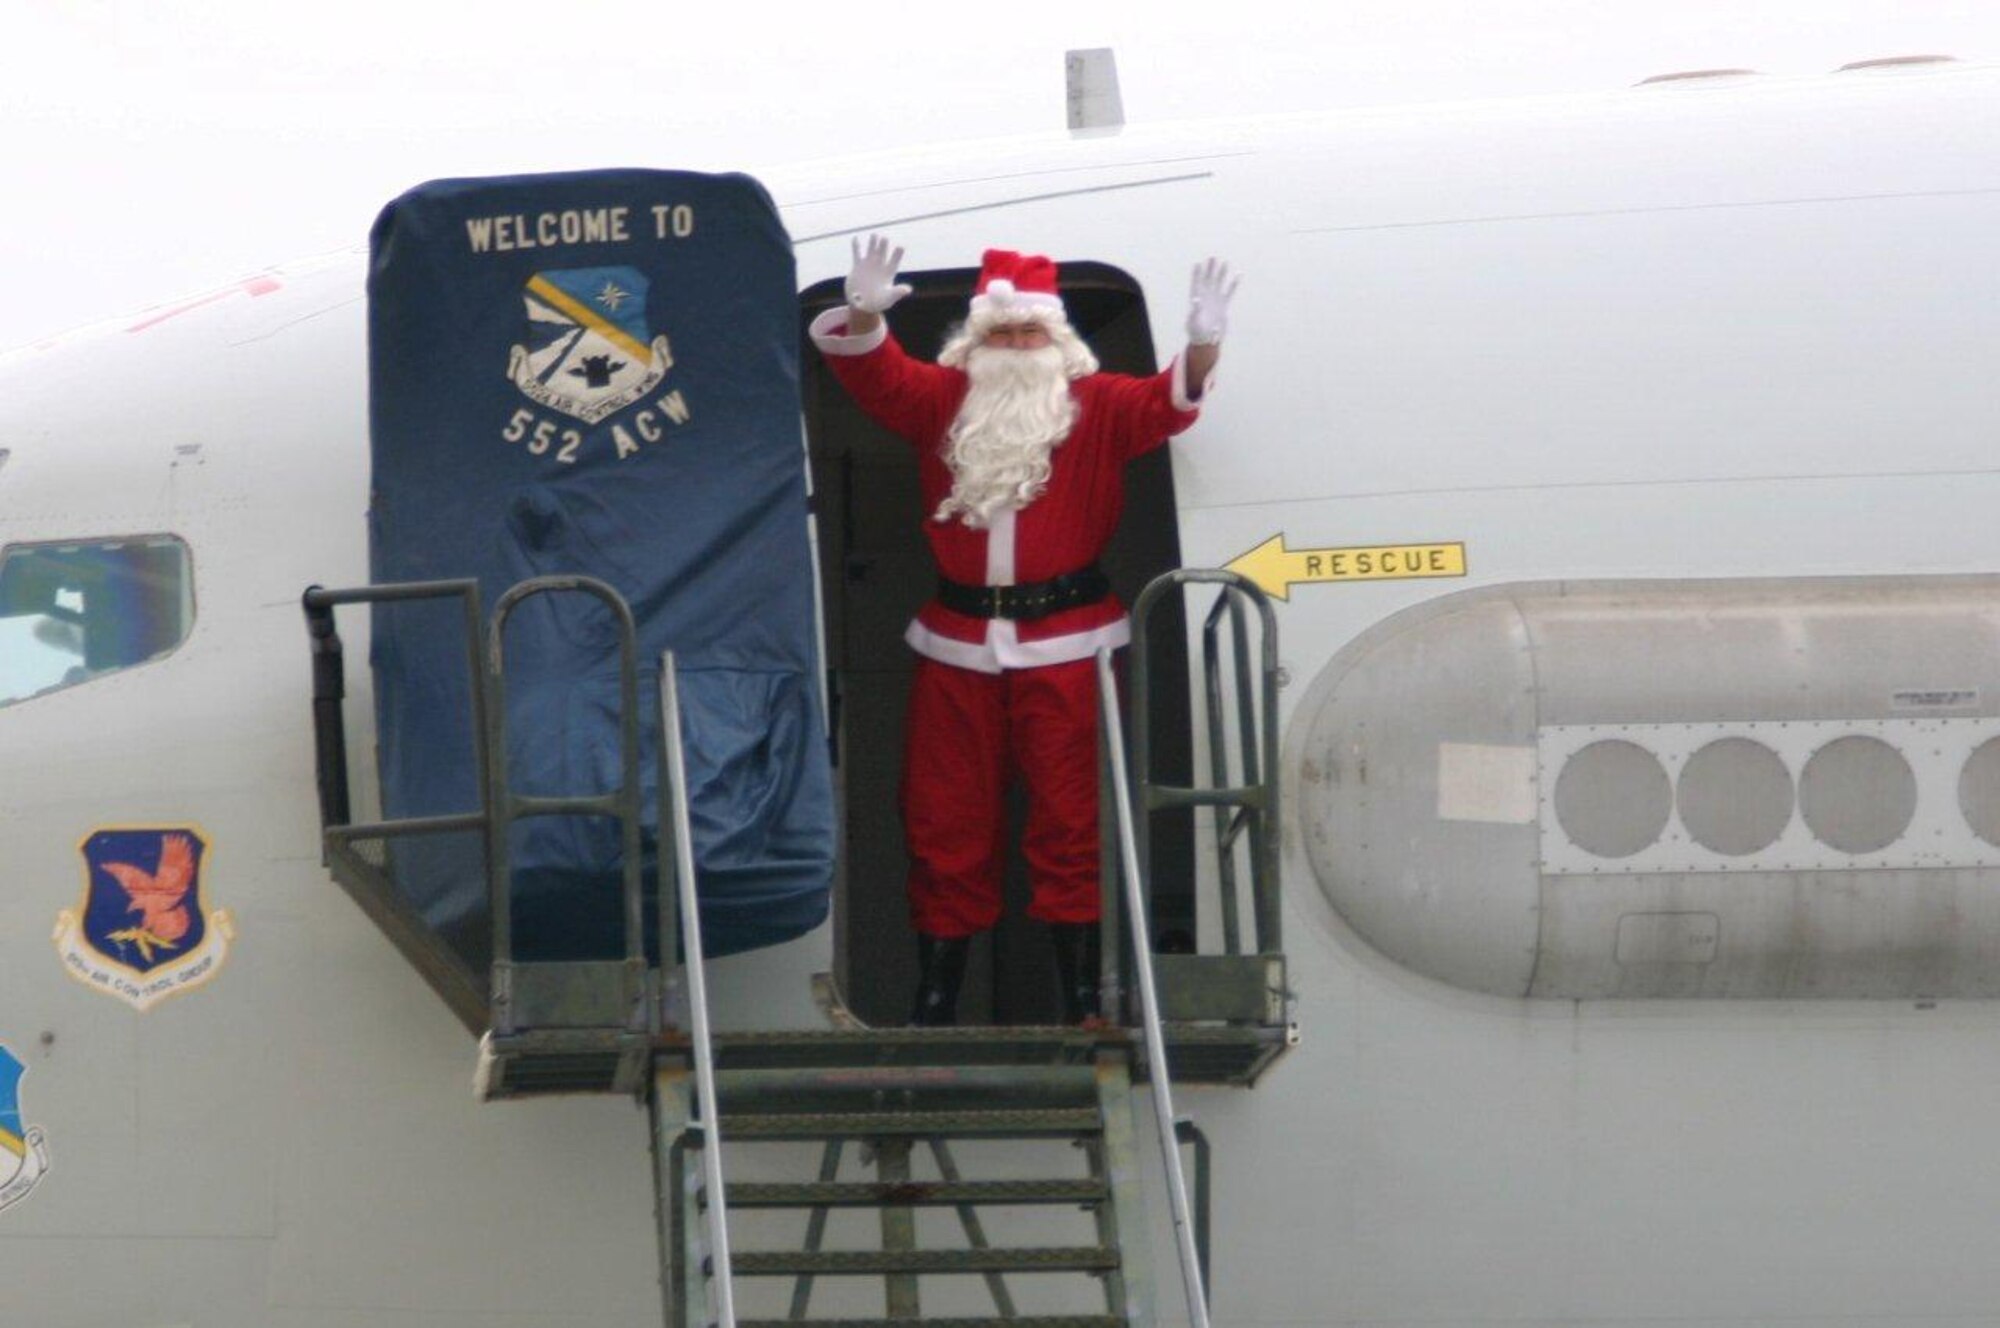 Santa Claus made a special appearance at Tinker Dec. 11. After flying in on an E-3 Sentry, the jolly old elf visited with the children of the 552nd Air Control Wing. (Air Force photo by Ken LaFayette)